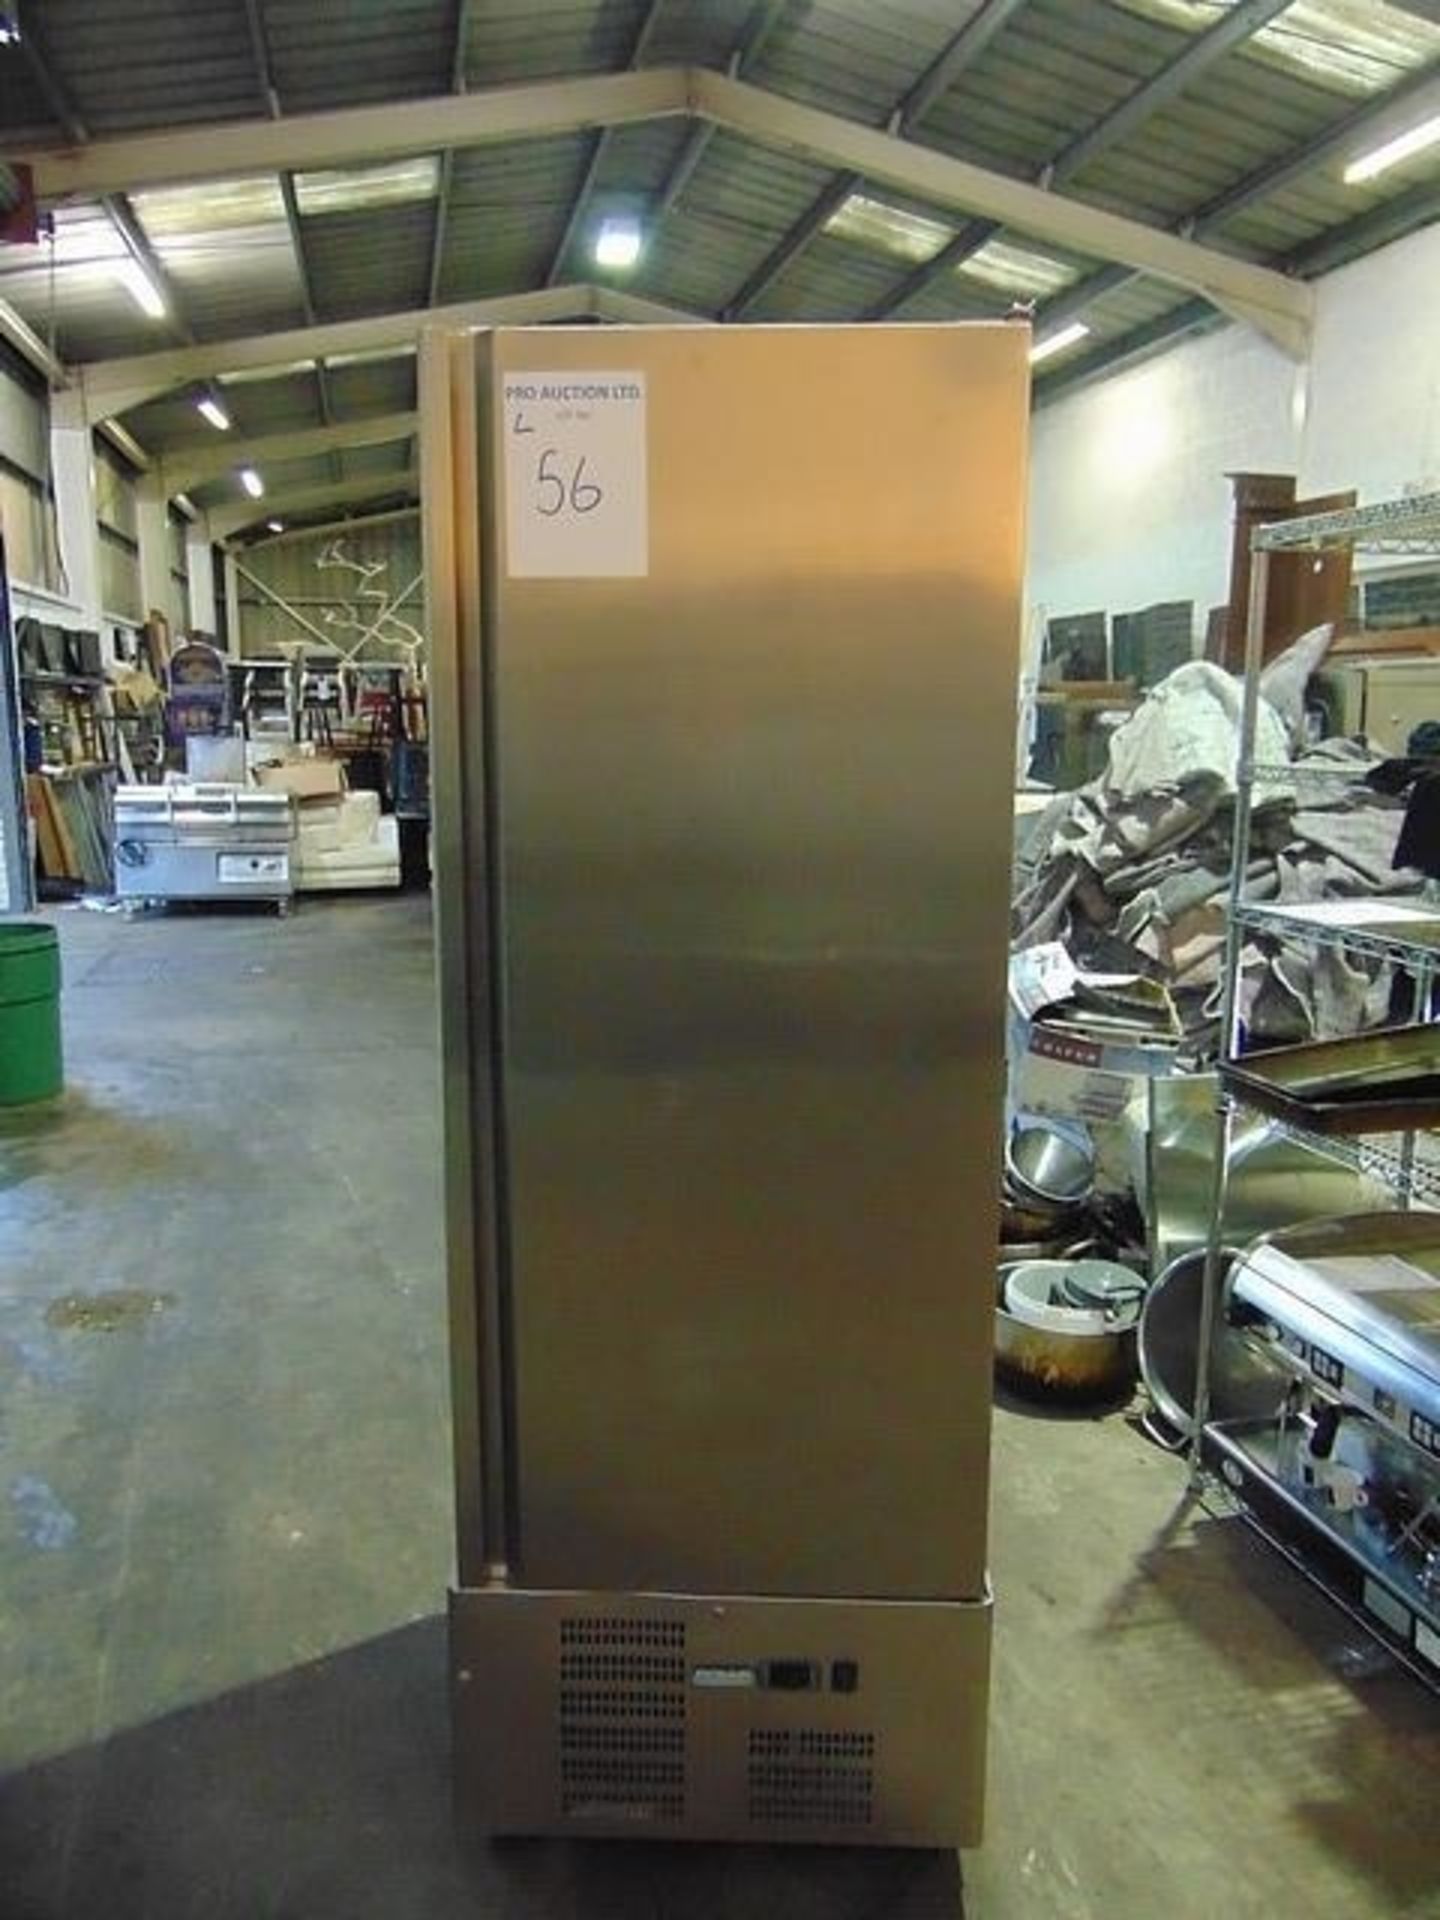 Polar G590 single door stainless steel commercial upright refrigerator capacity 440 litres